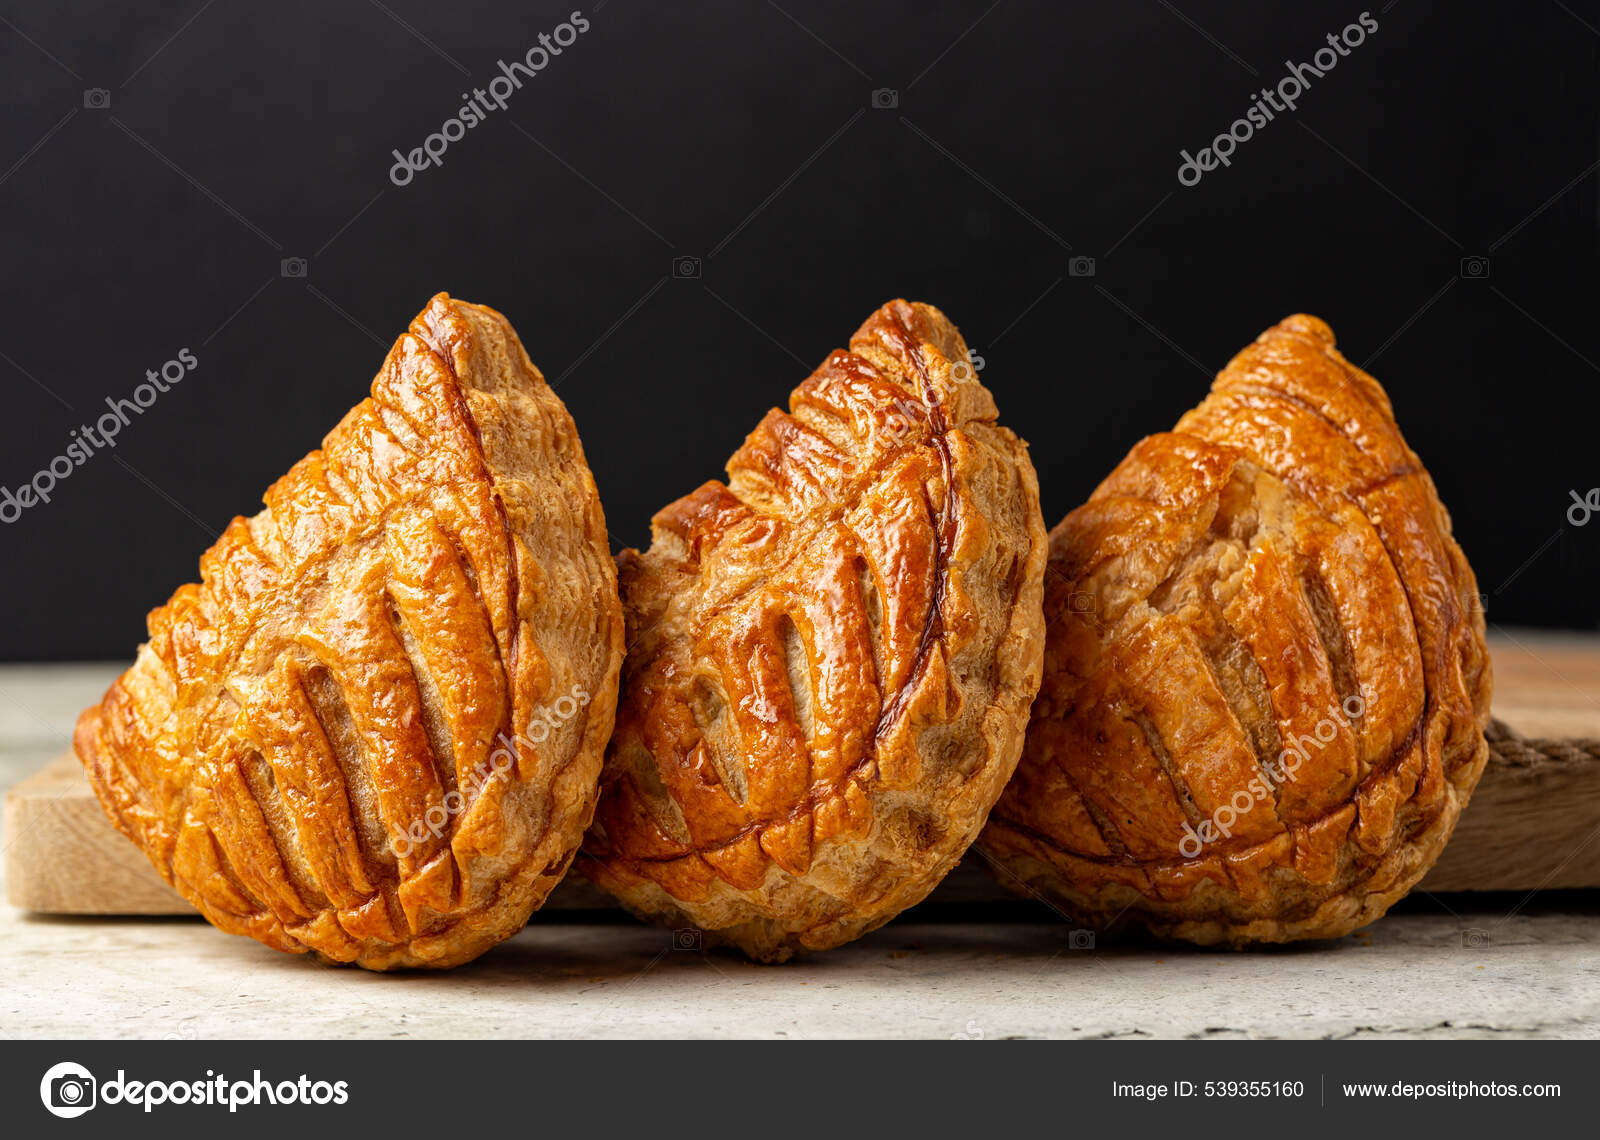 Chaussons aux pommes (apple turnovers)